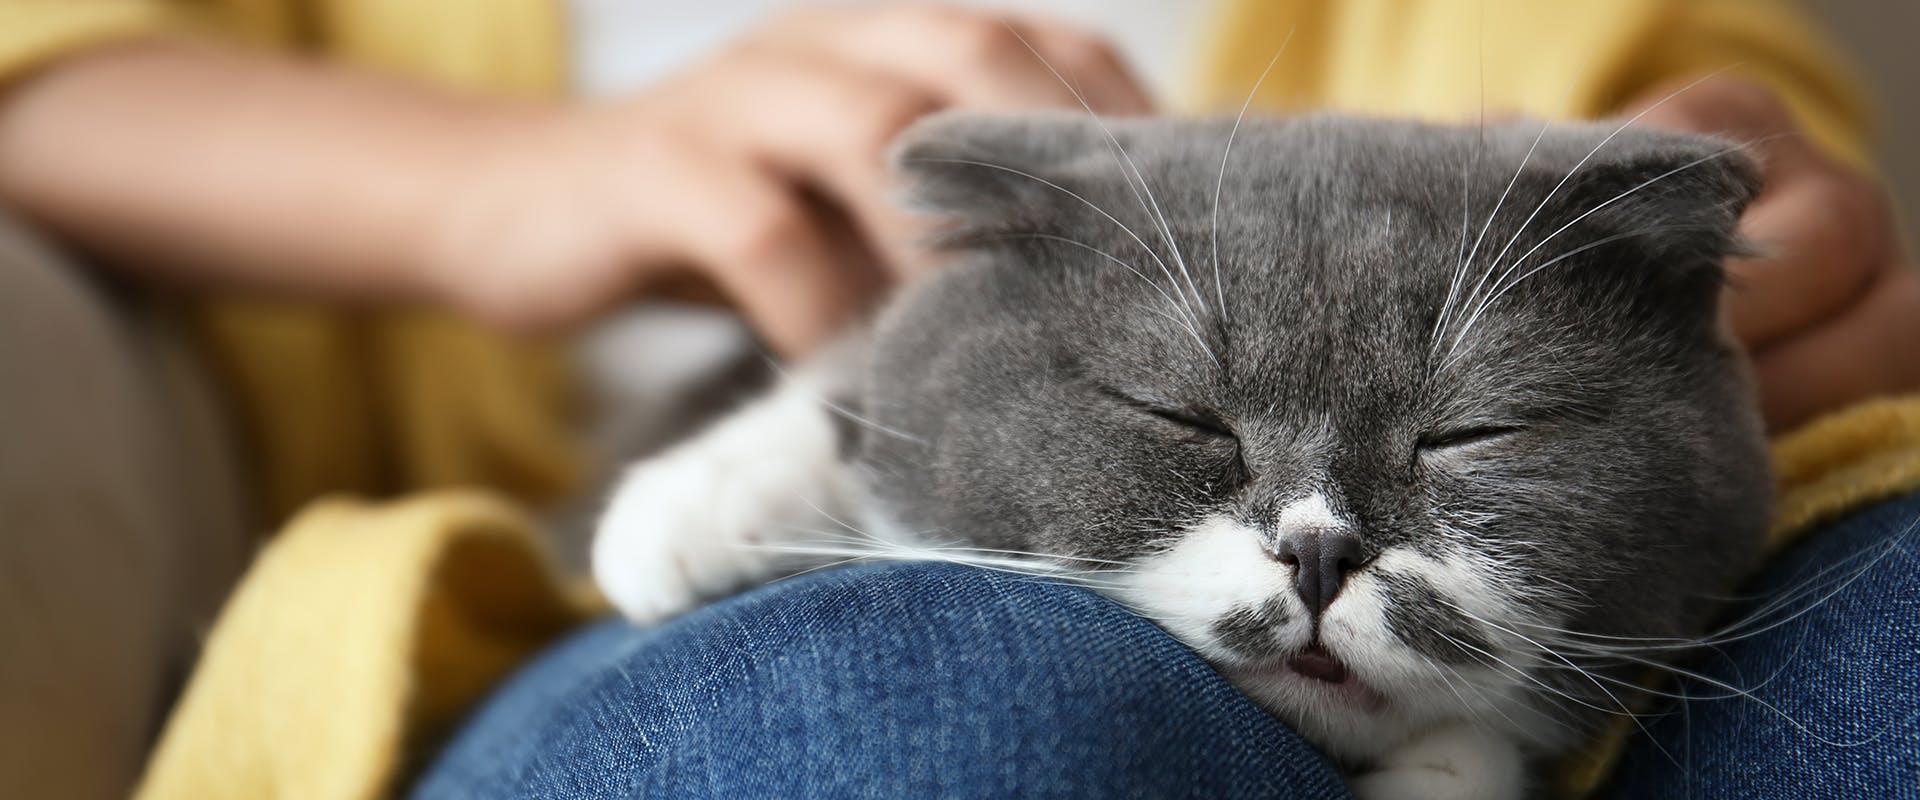 Why do cats sleep on you? A cat sleeping on a person's lap